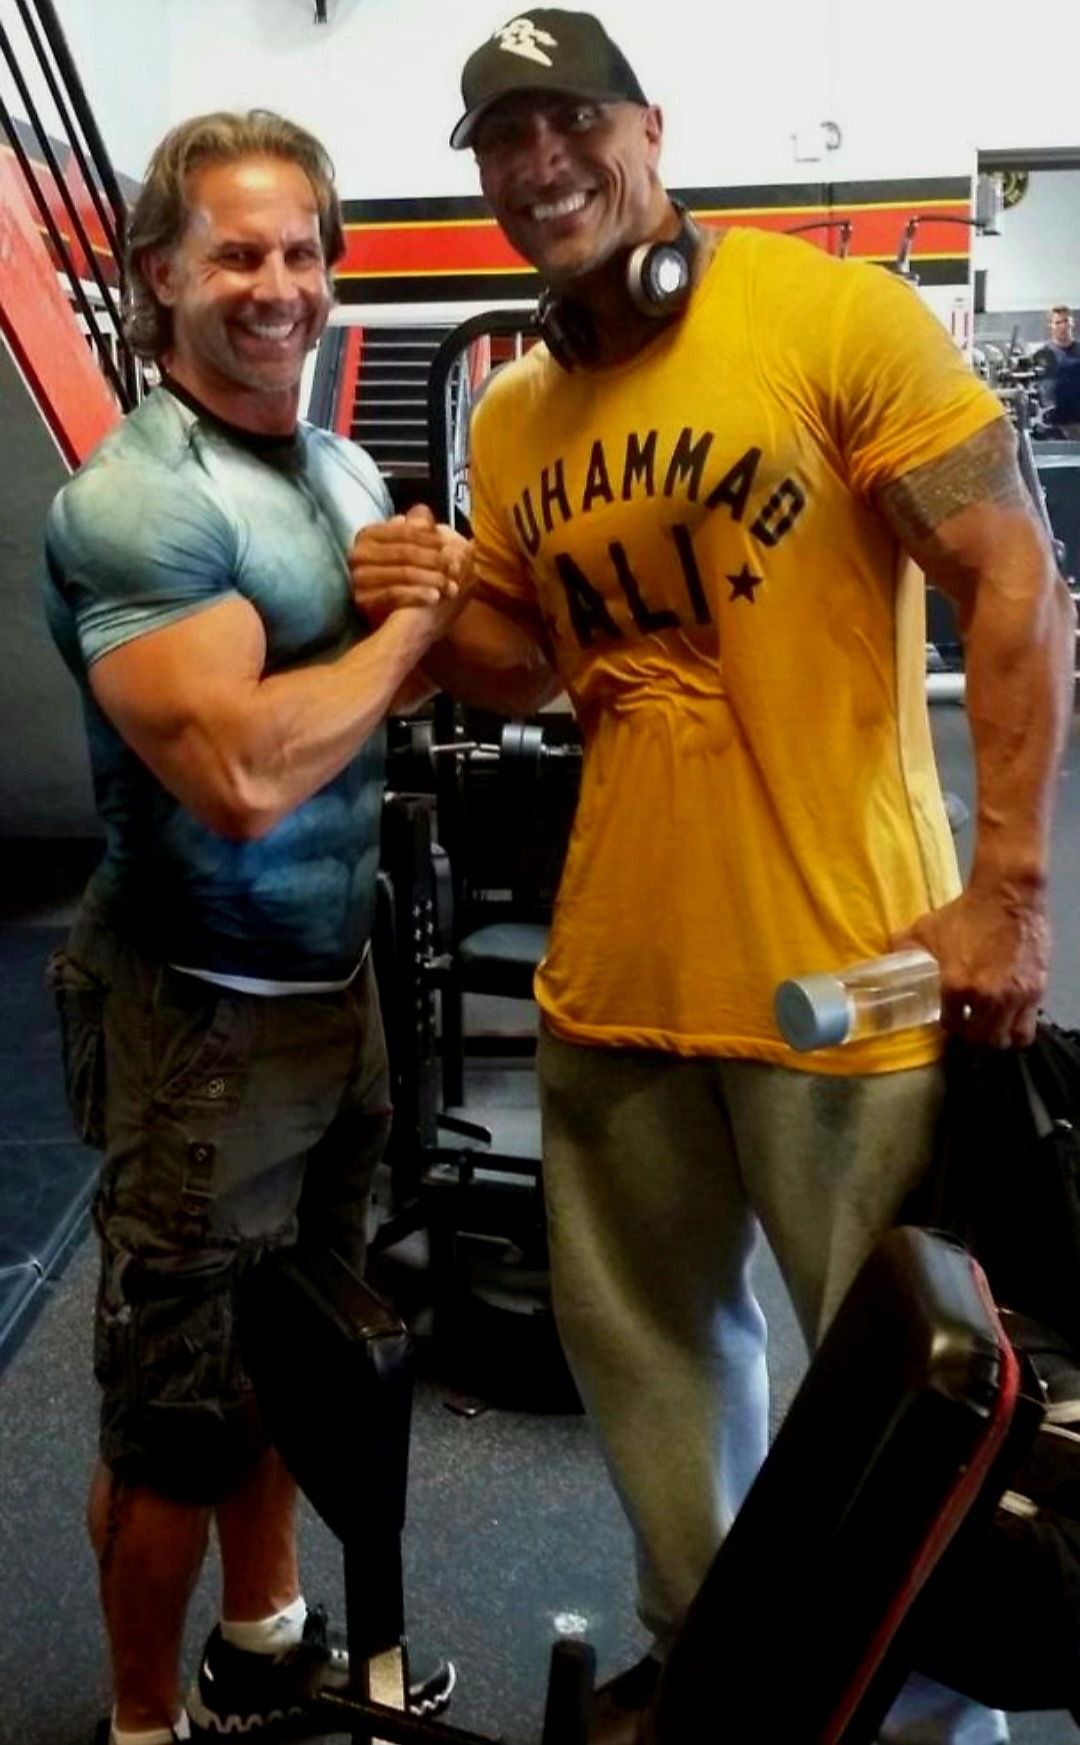 Exclusive: Interview & Fitness Program With The Rock’s Trainer, Mike Ryan